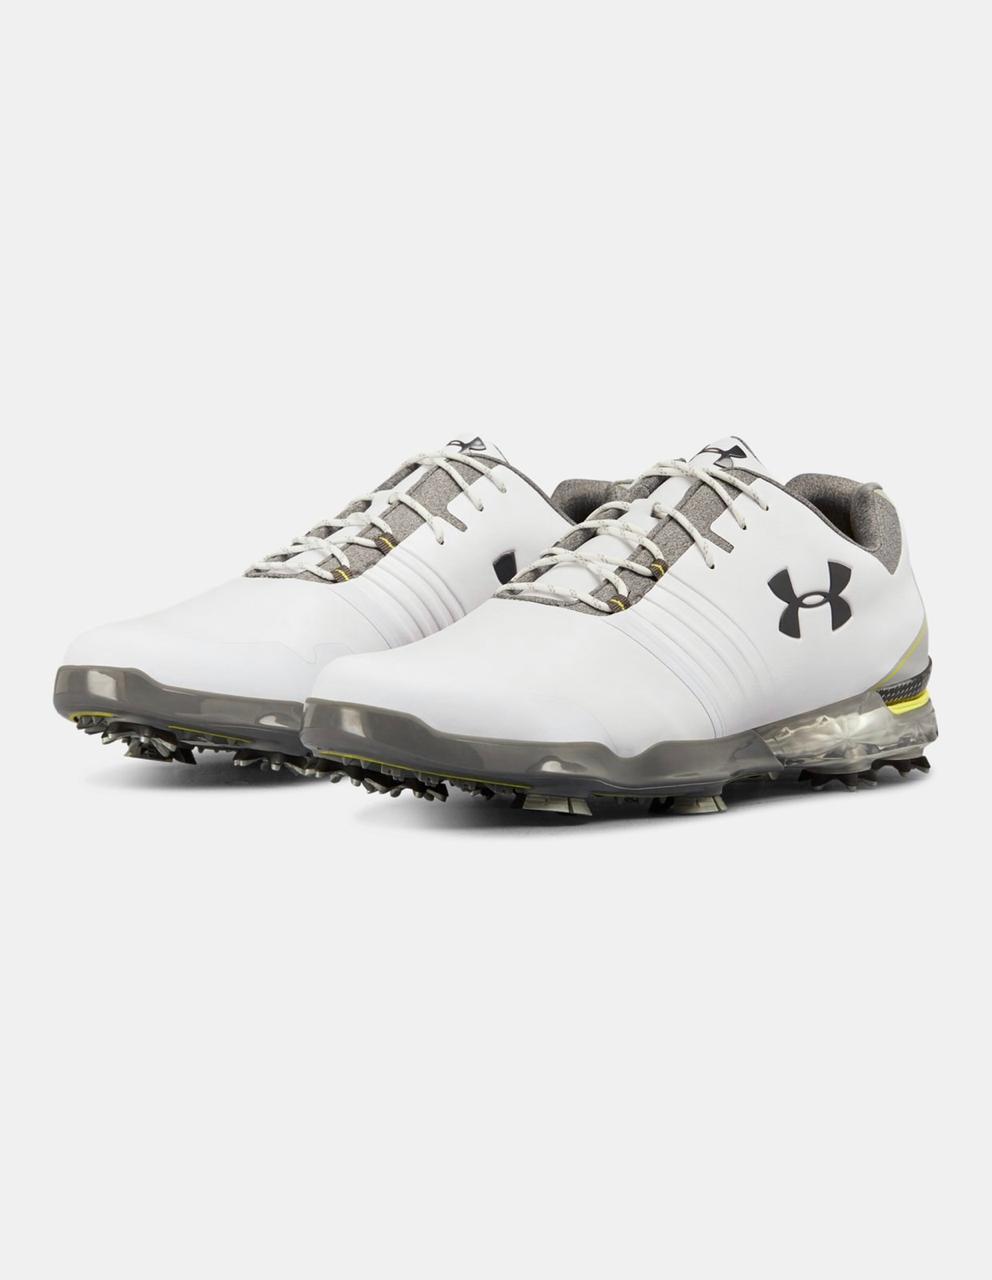 best price on golf shoes